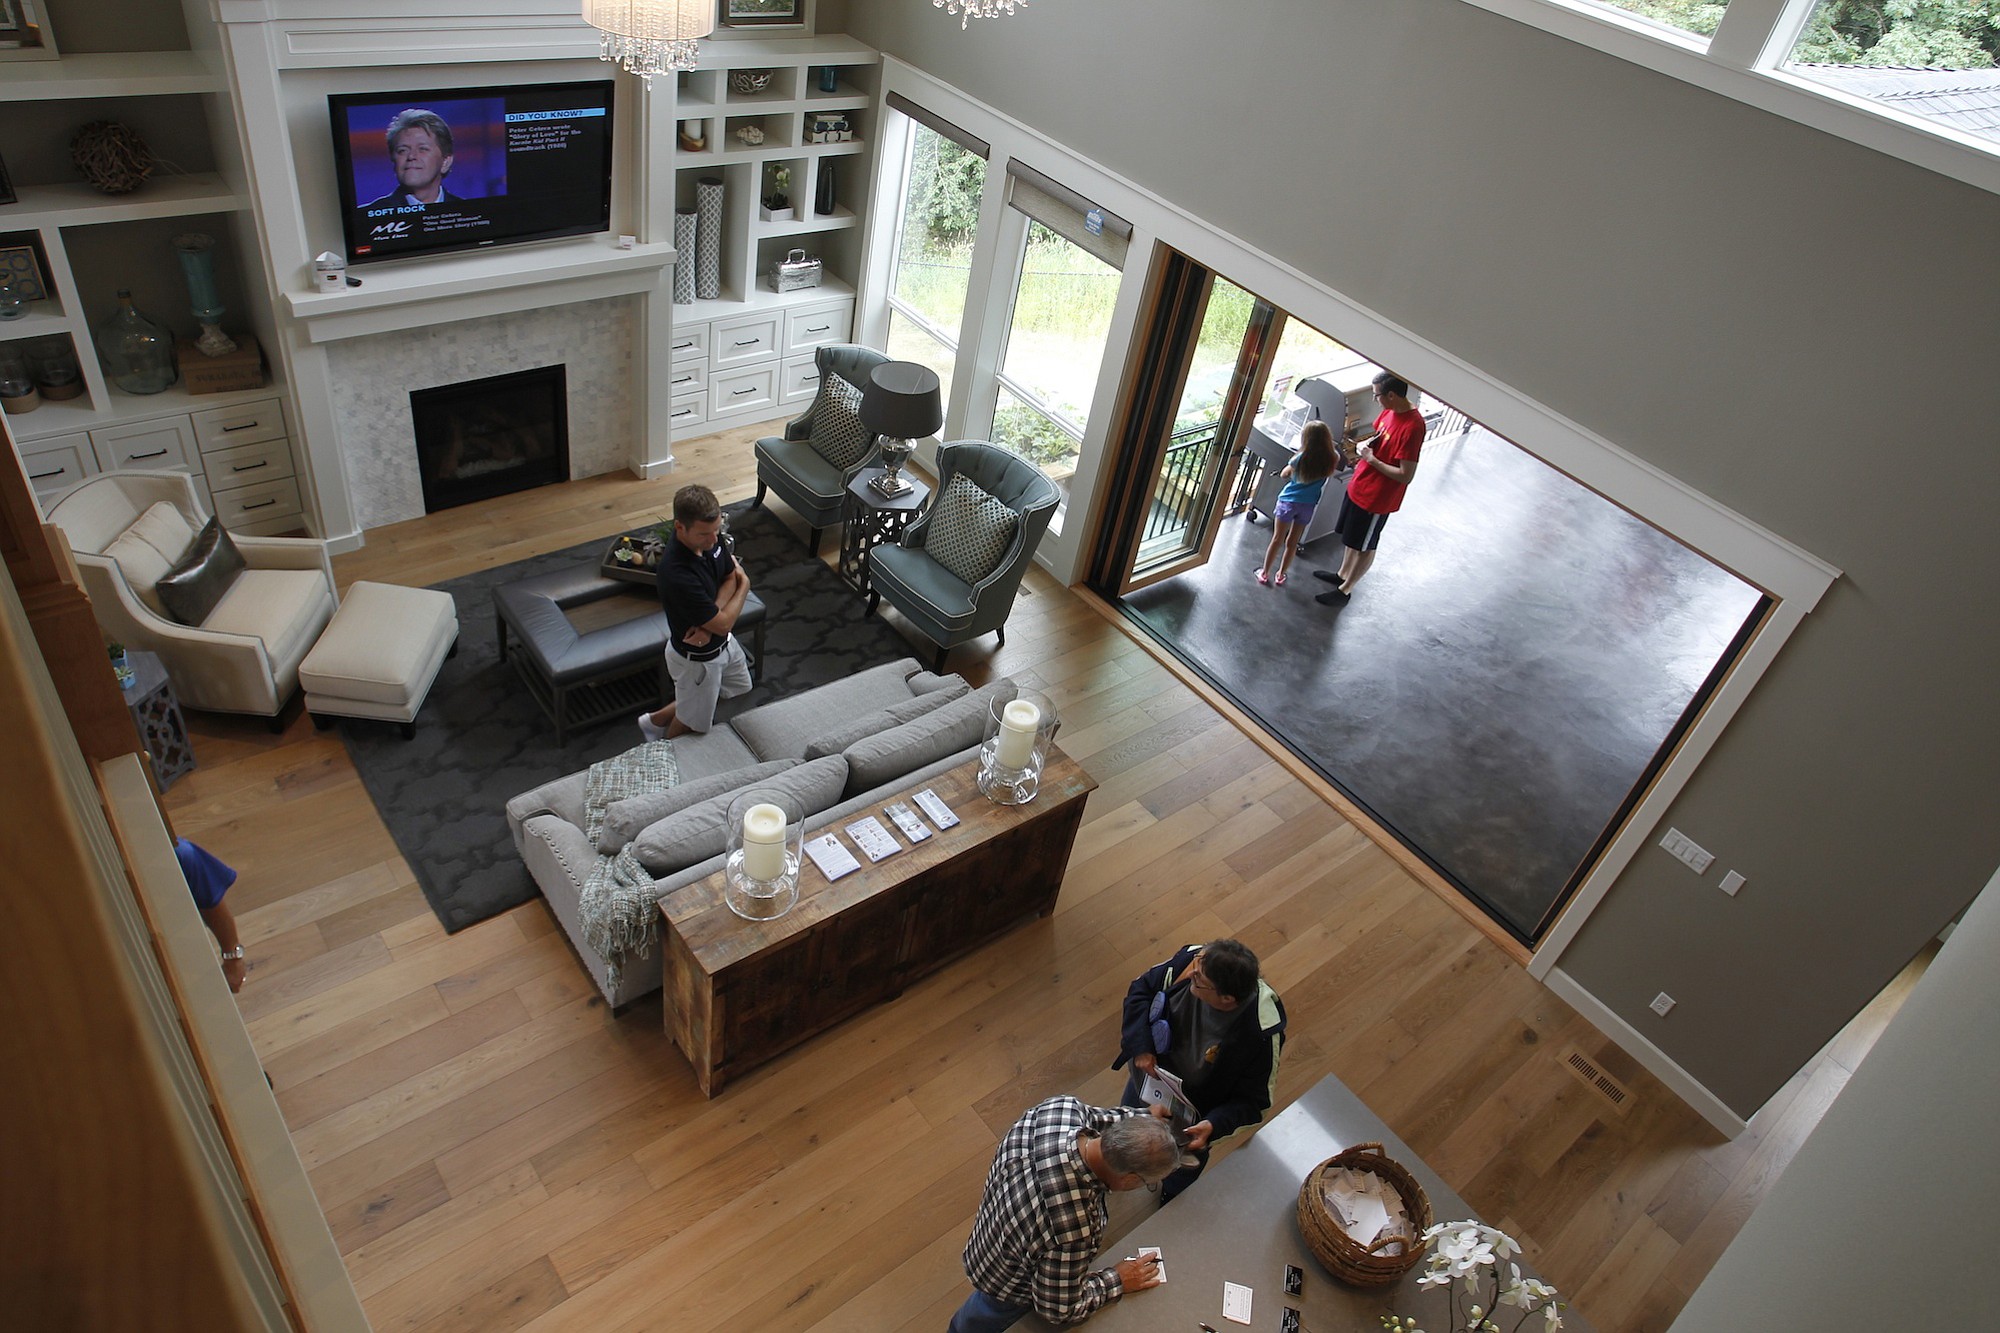 Photos by Steve Dipaola for the Columbian
The Finleigh, by Cascade West Develoment, features four bedrooms and 4.5 baths in its two floors. The home is designed with both contemporary and traditional elements suitable for family living.